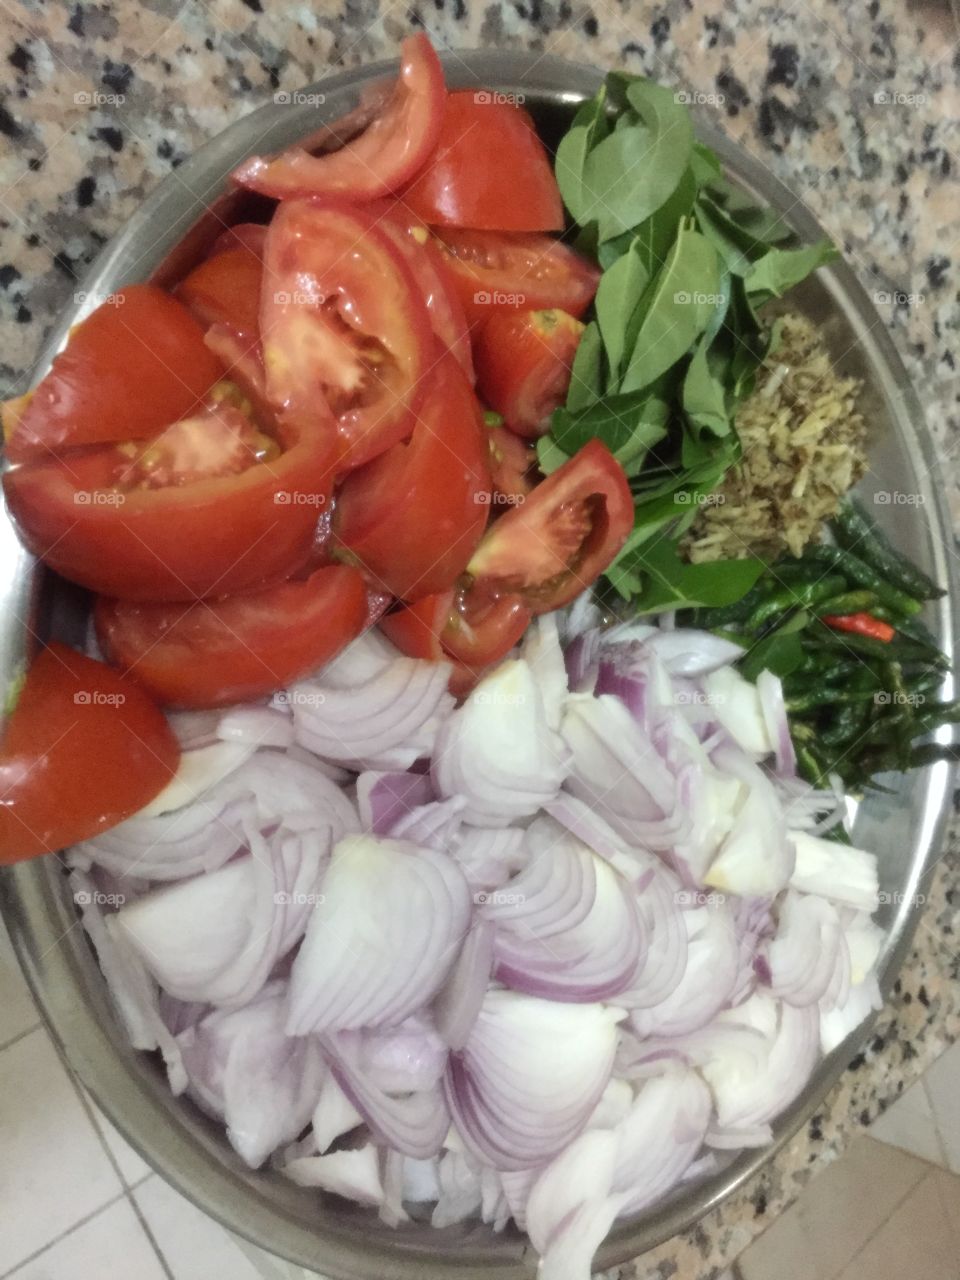 Ready to cook chicken biriyani for dinner with friends. 